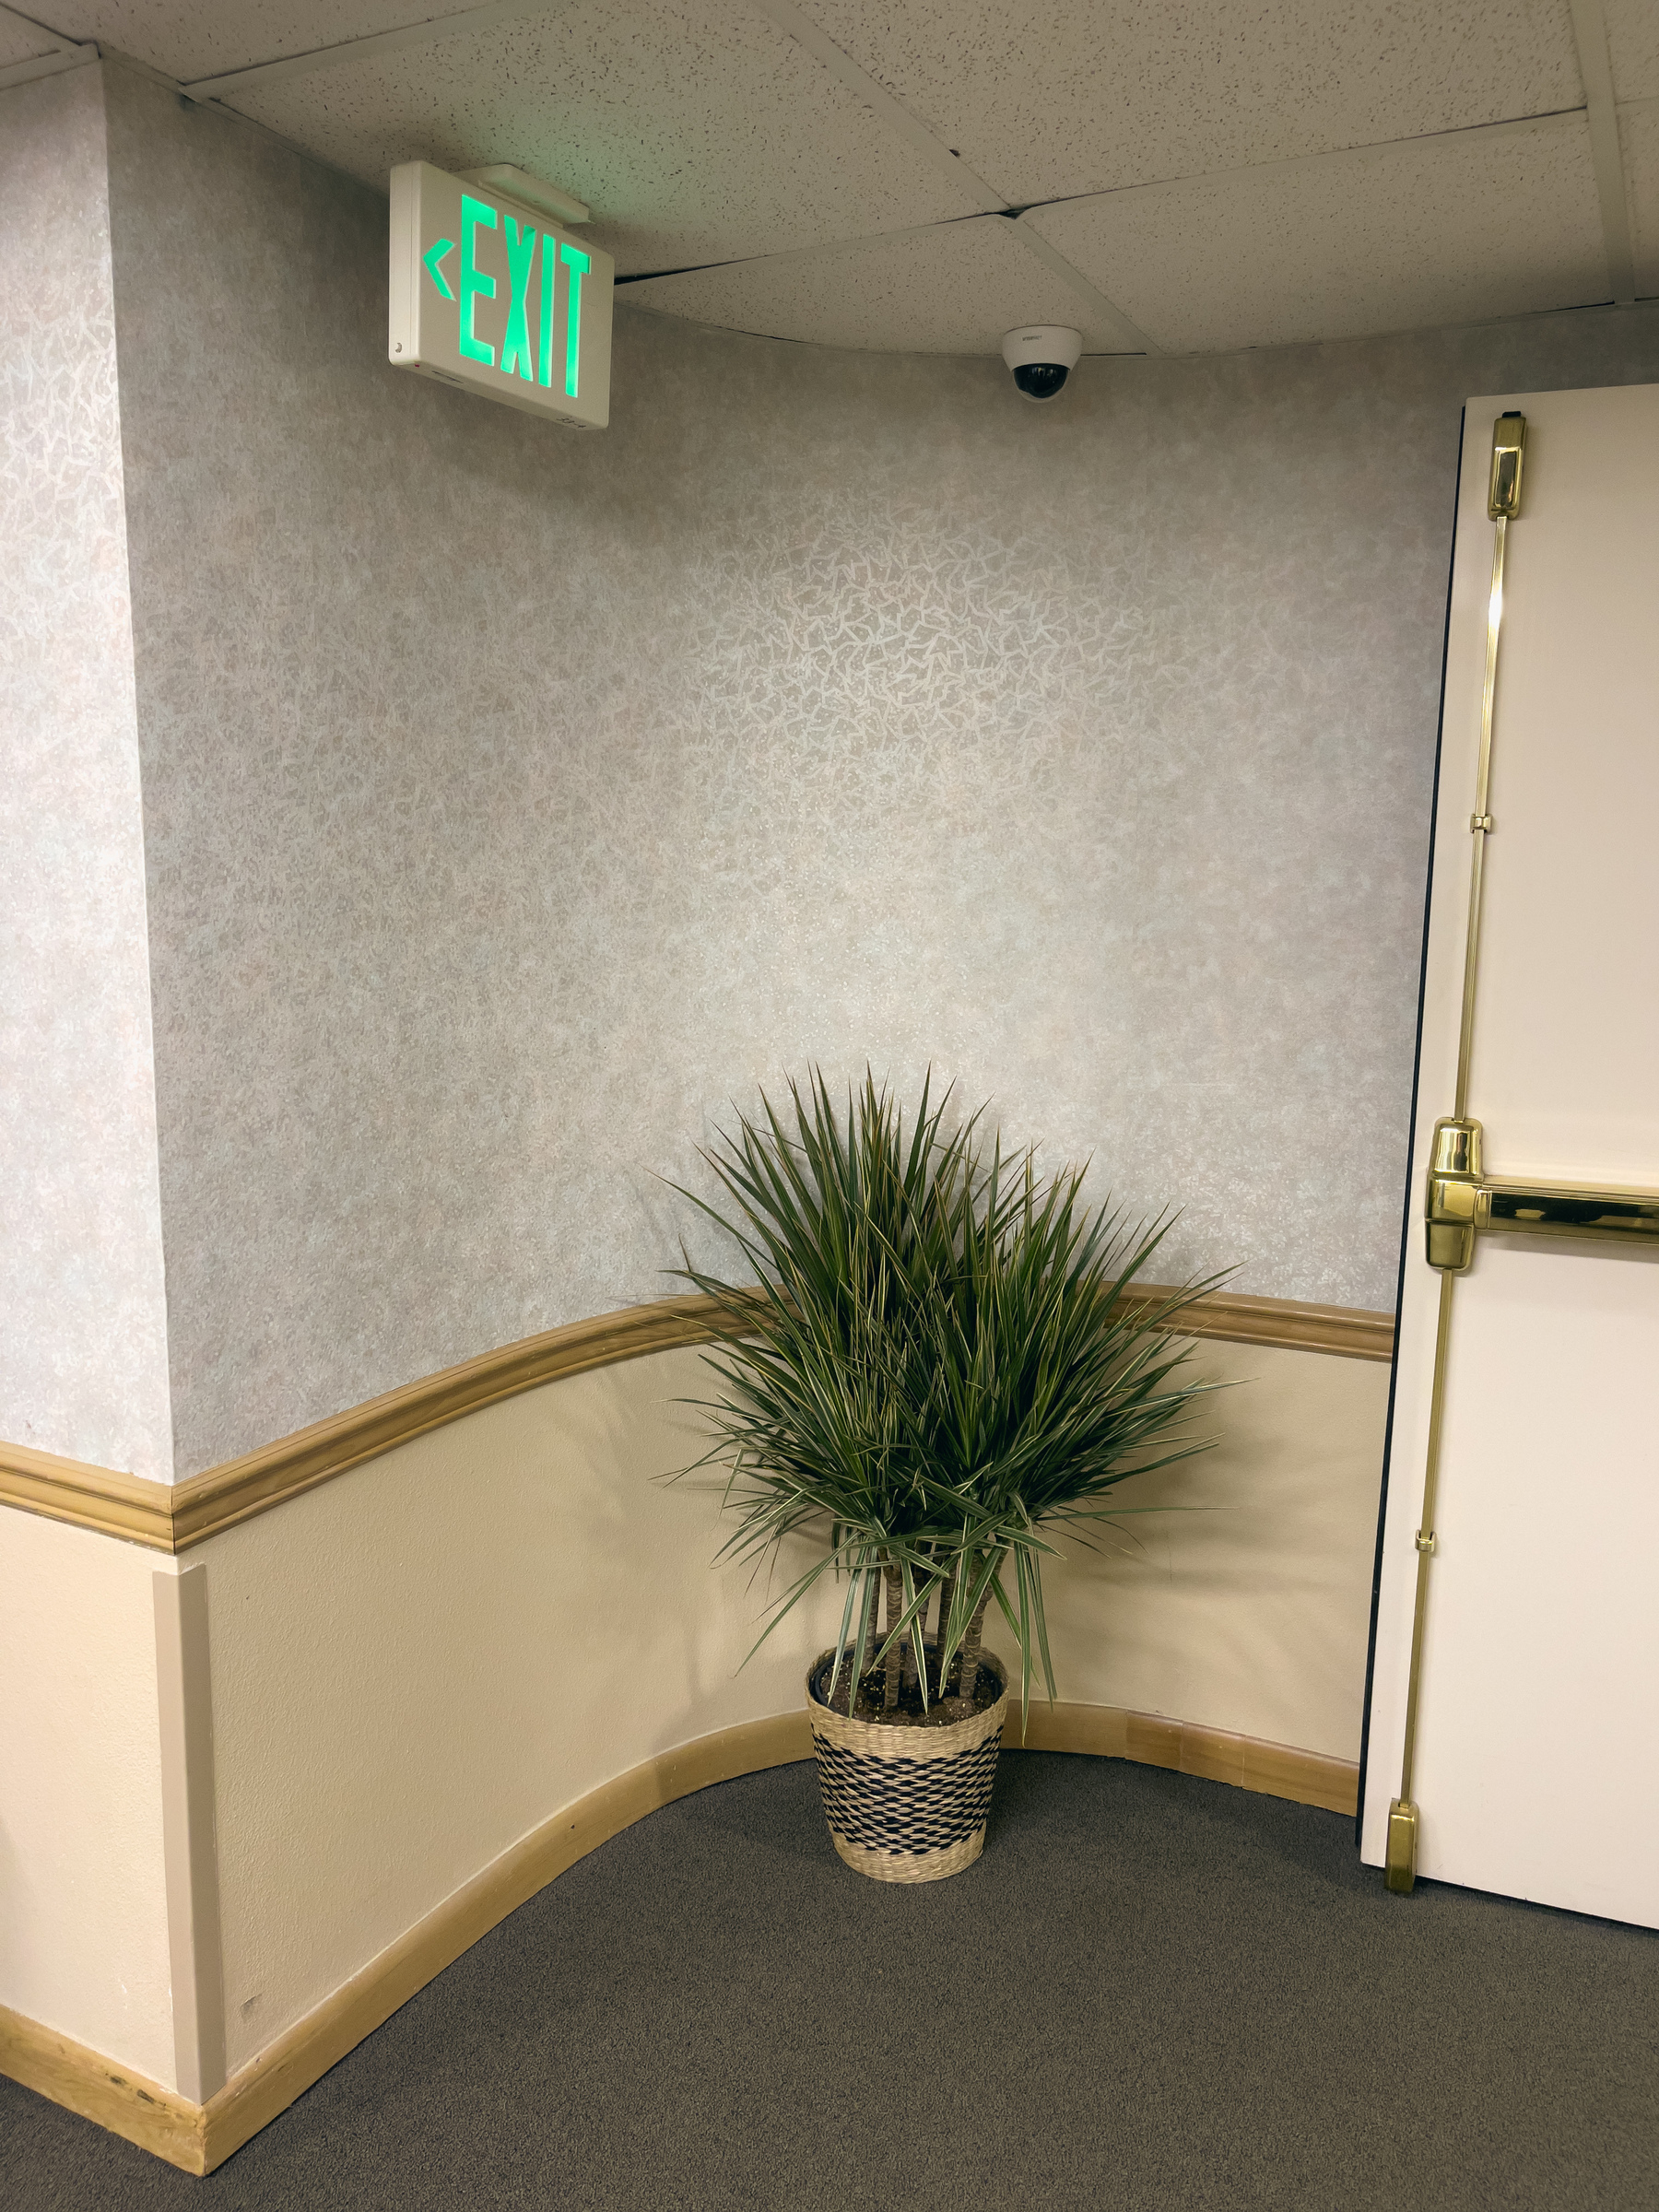 Curved inside corner in a hallway with potted plant in middle of curve, edge of a fire door to the right, sharp outside corner on the left, green EXIT sign at the top left of the frame. 